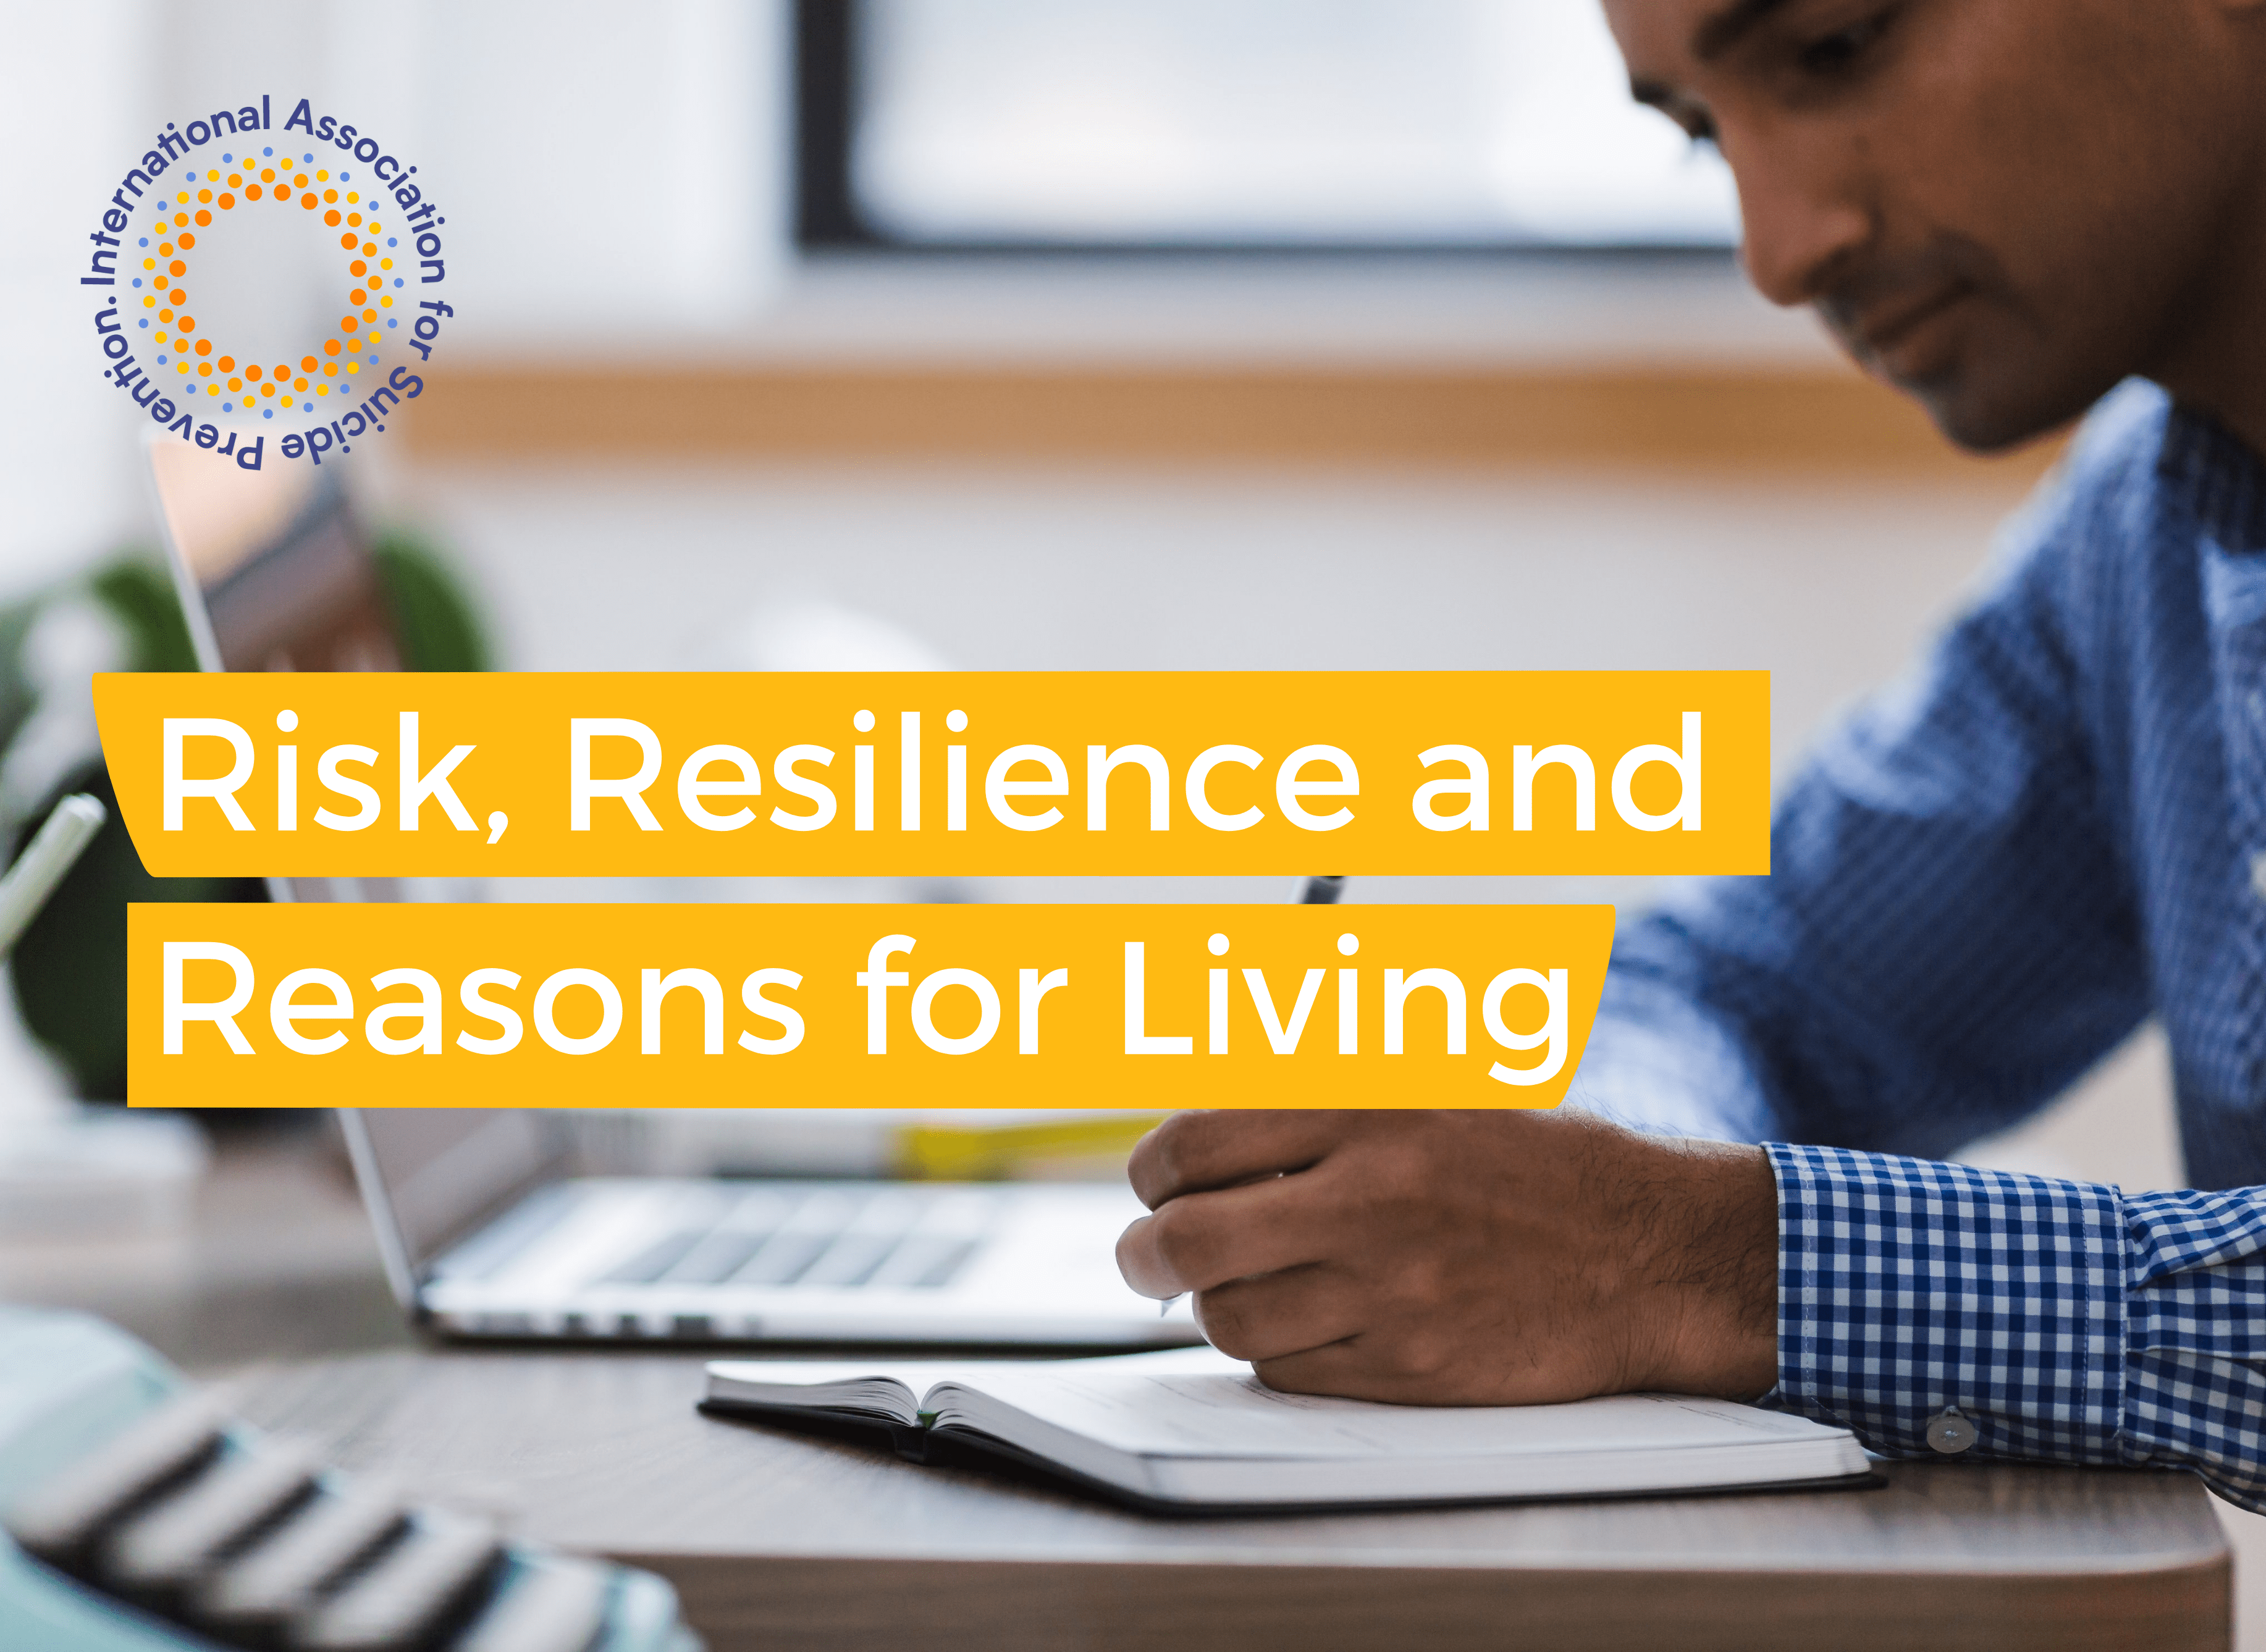 Risk, Resilience and Reasons for Living